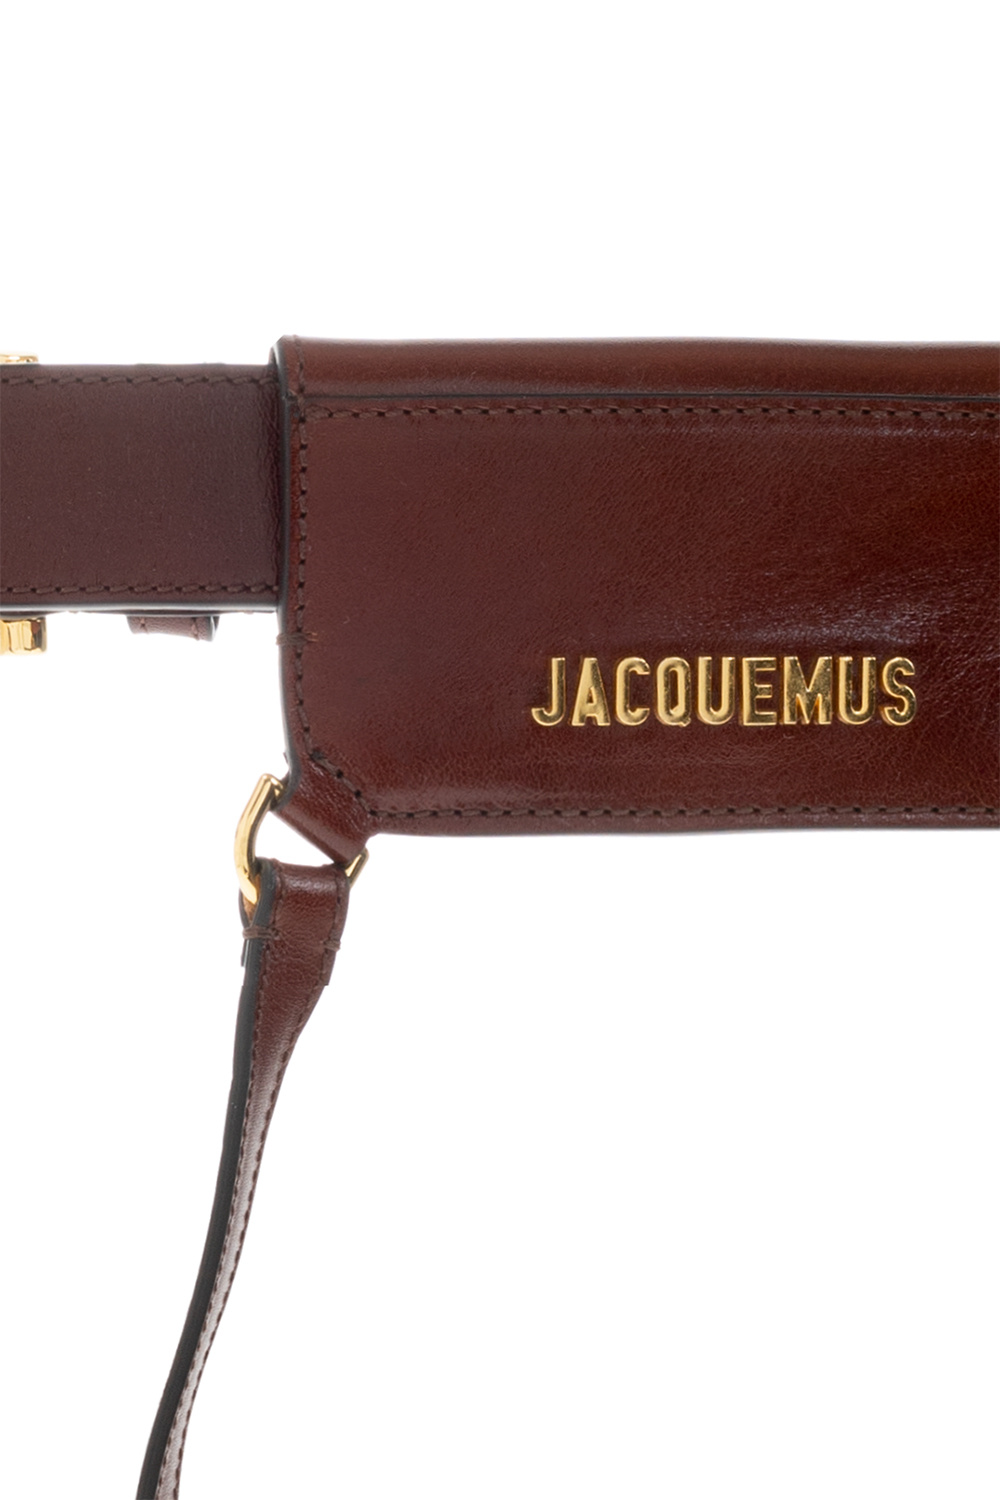 Jacquemus Download the latest version of the app